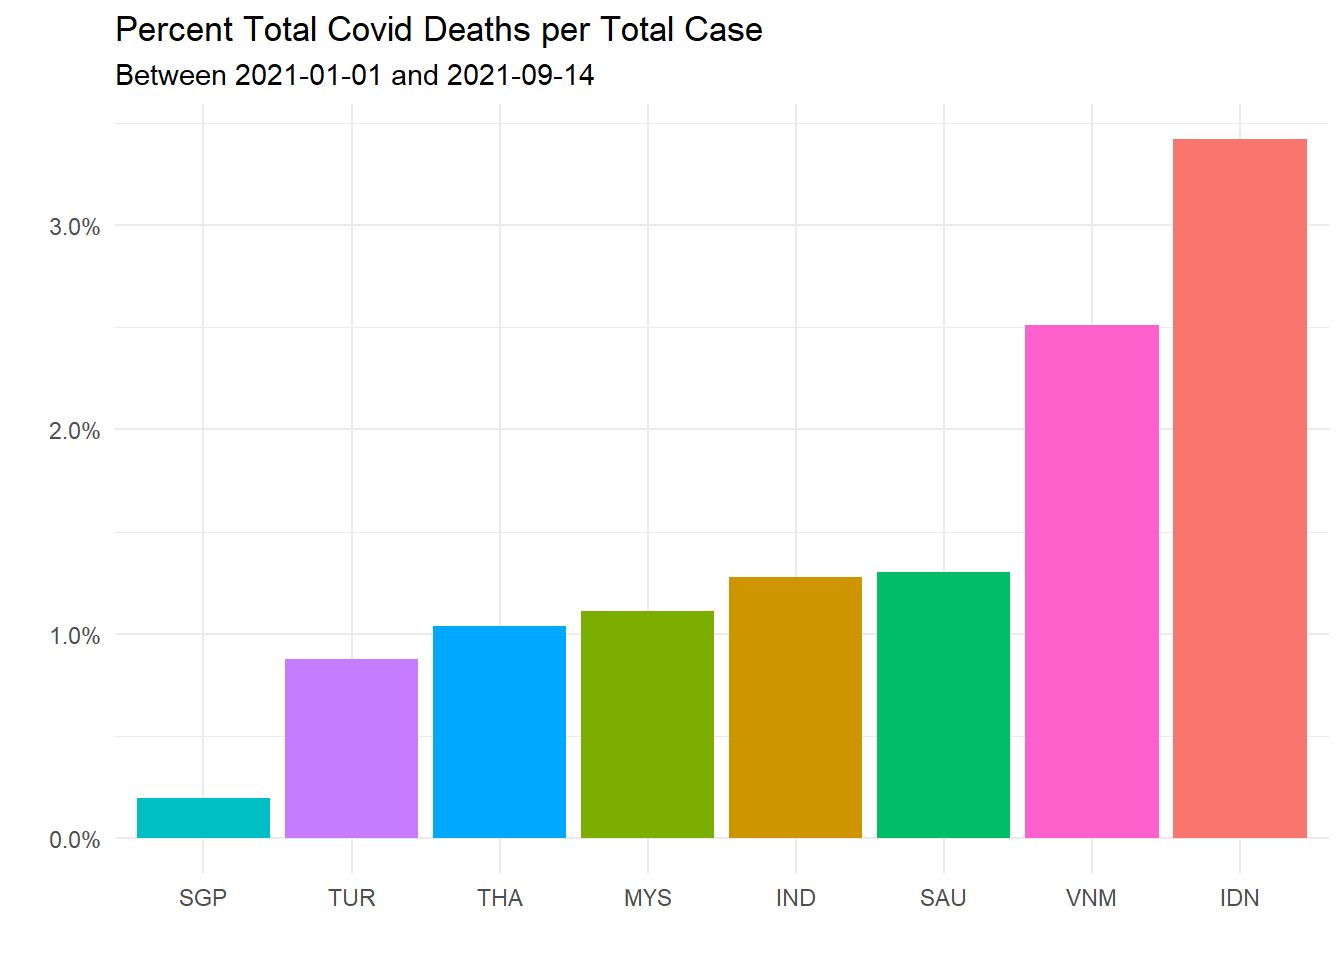 Total Covid deaths per total case for selected countries